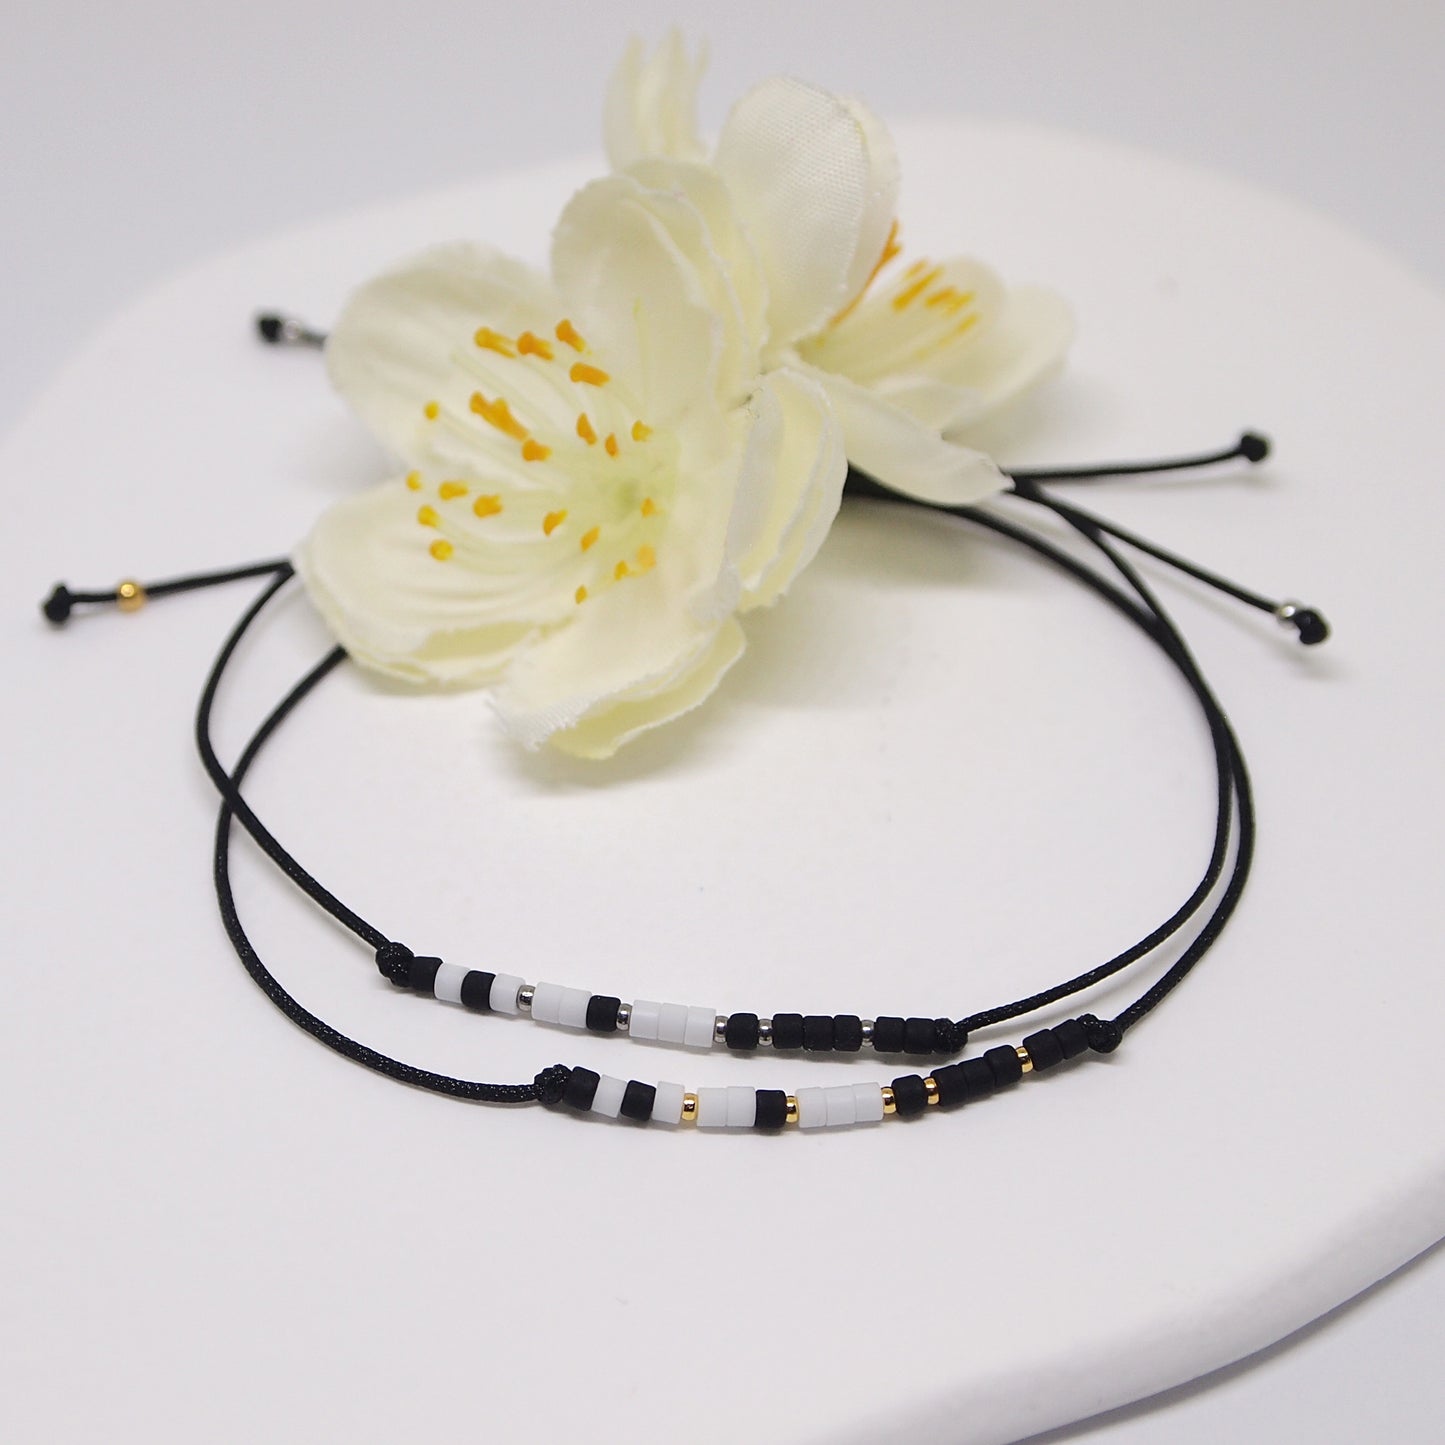 morse code couples matching bracelets in black and white